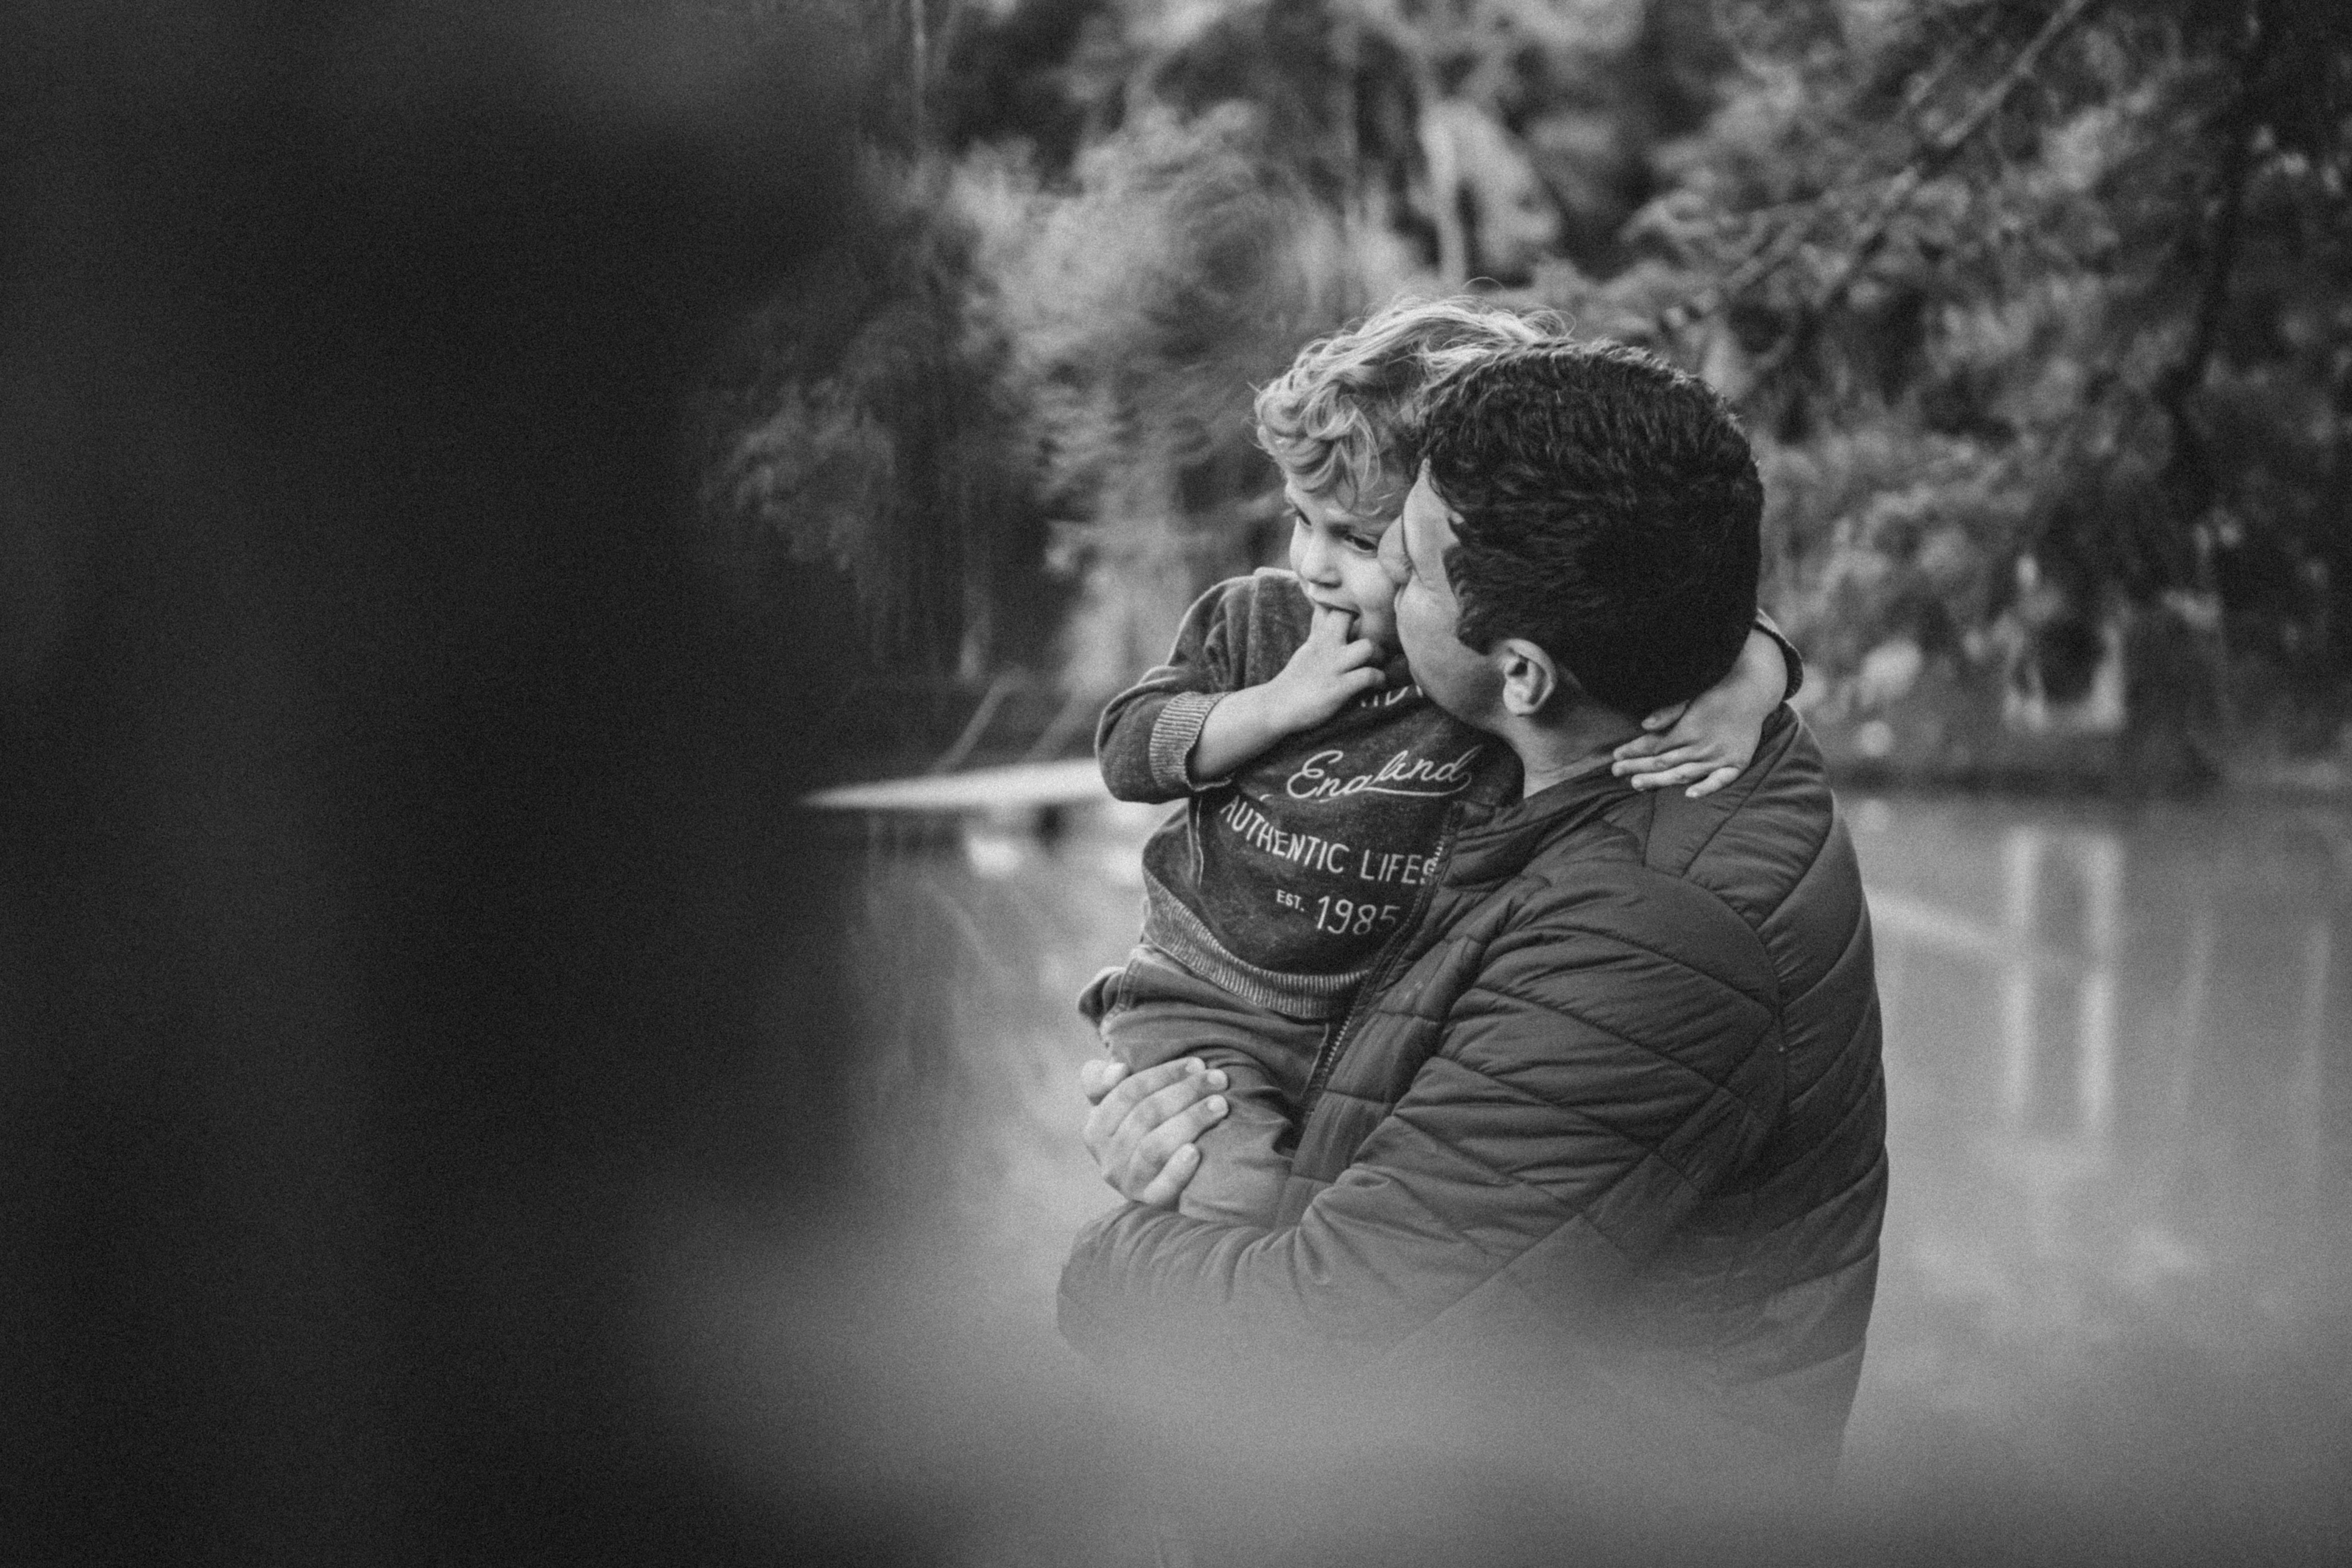 A man holding a small boy in his arms | Source: Pexels